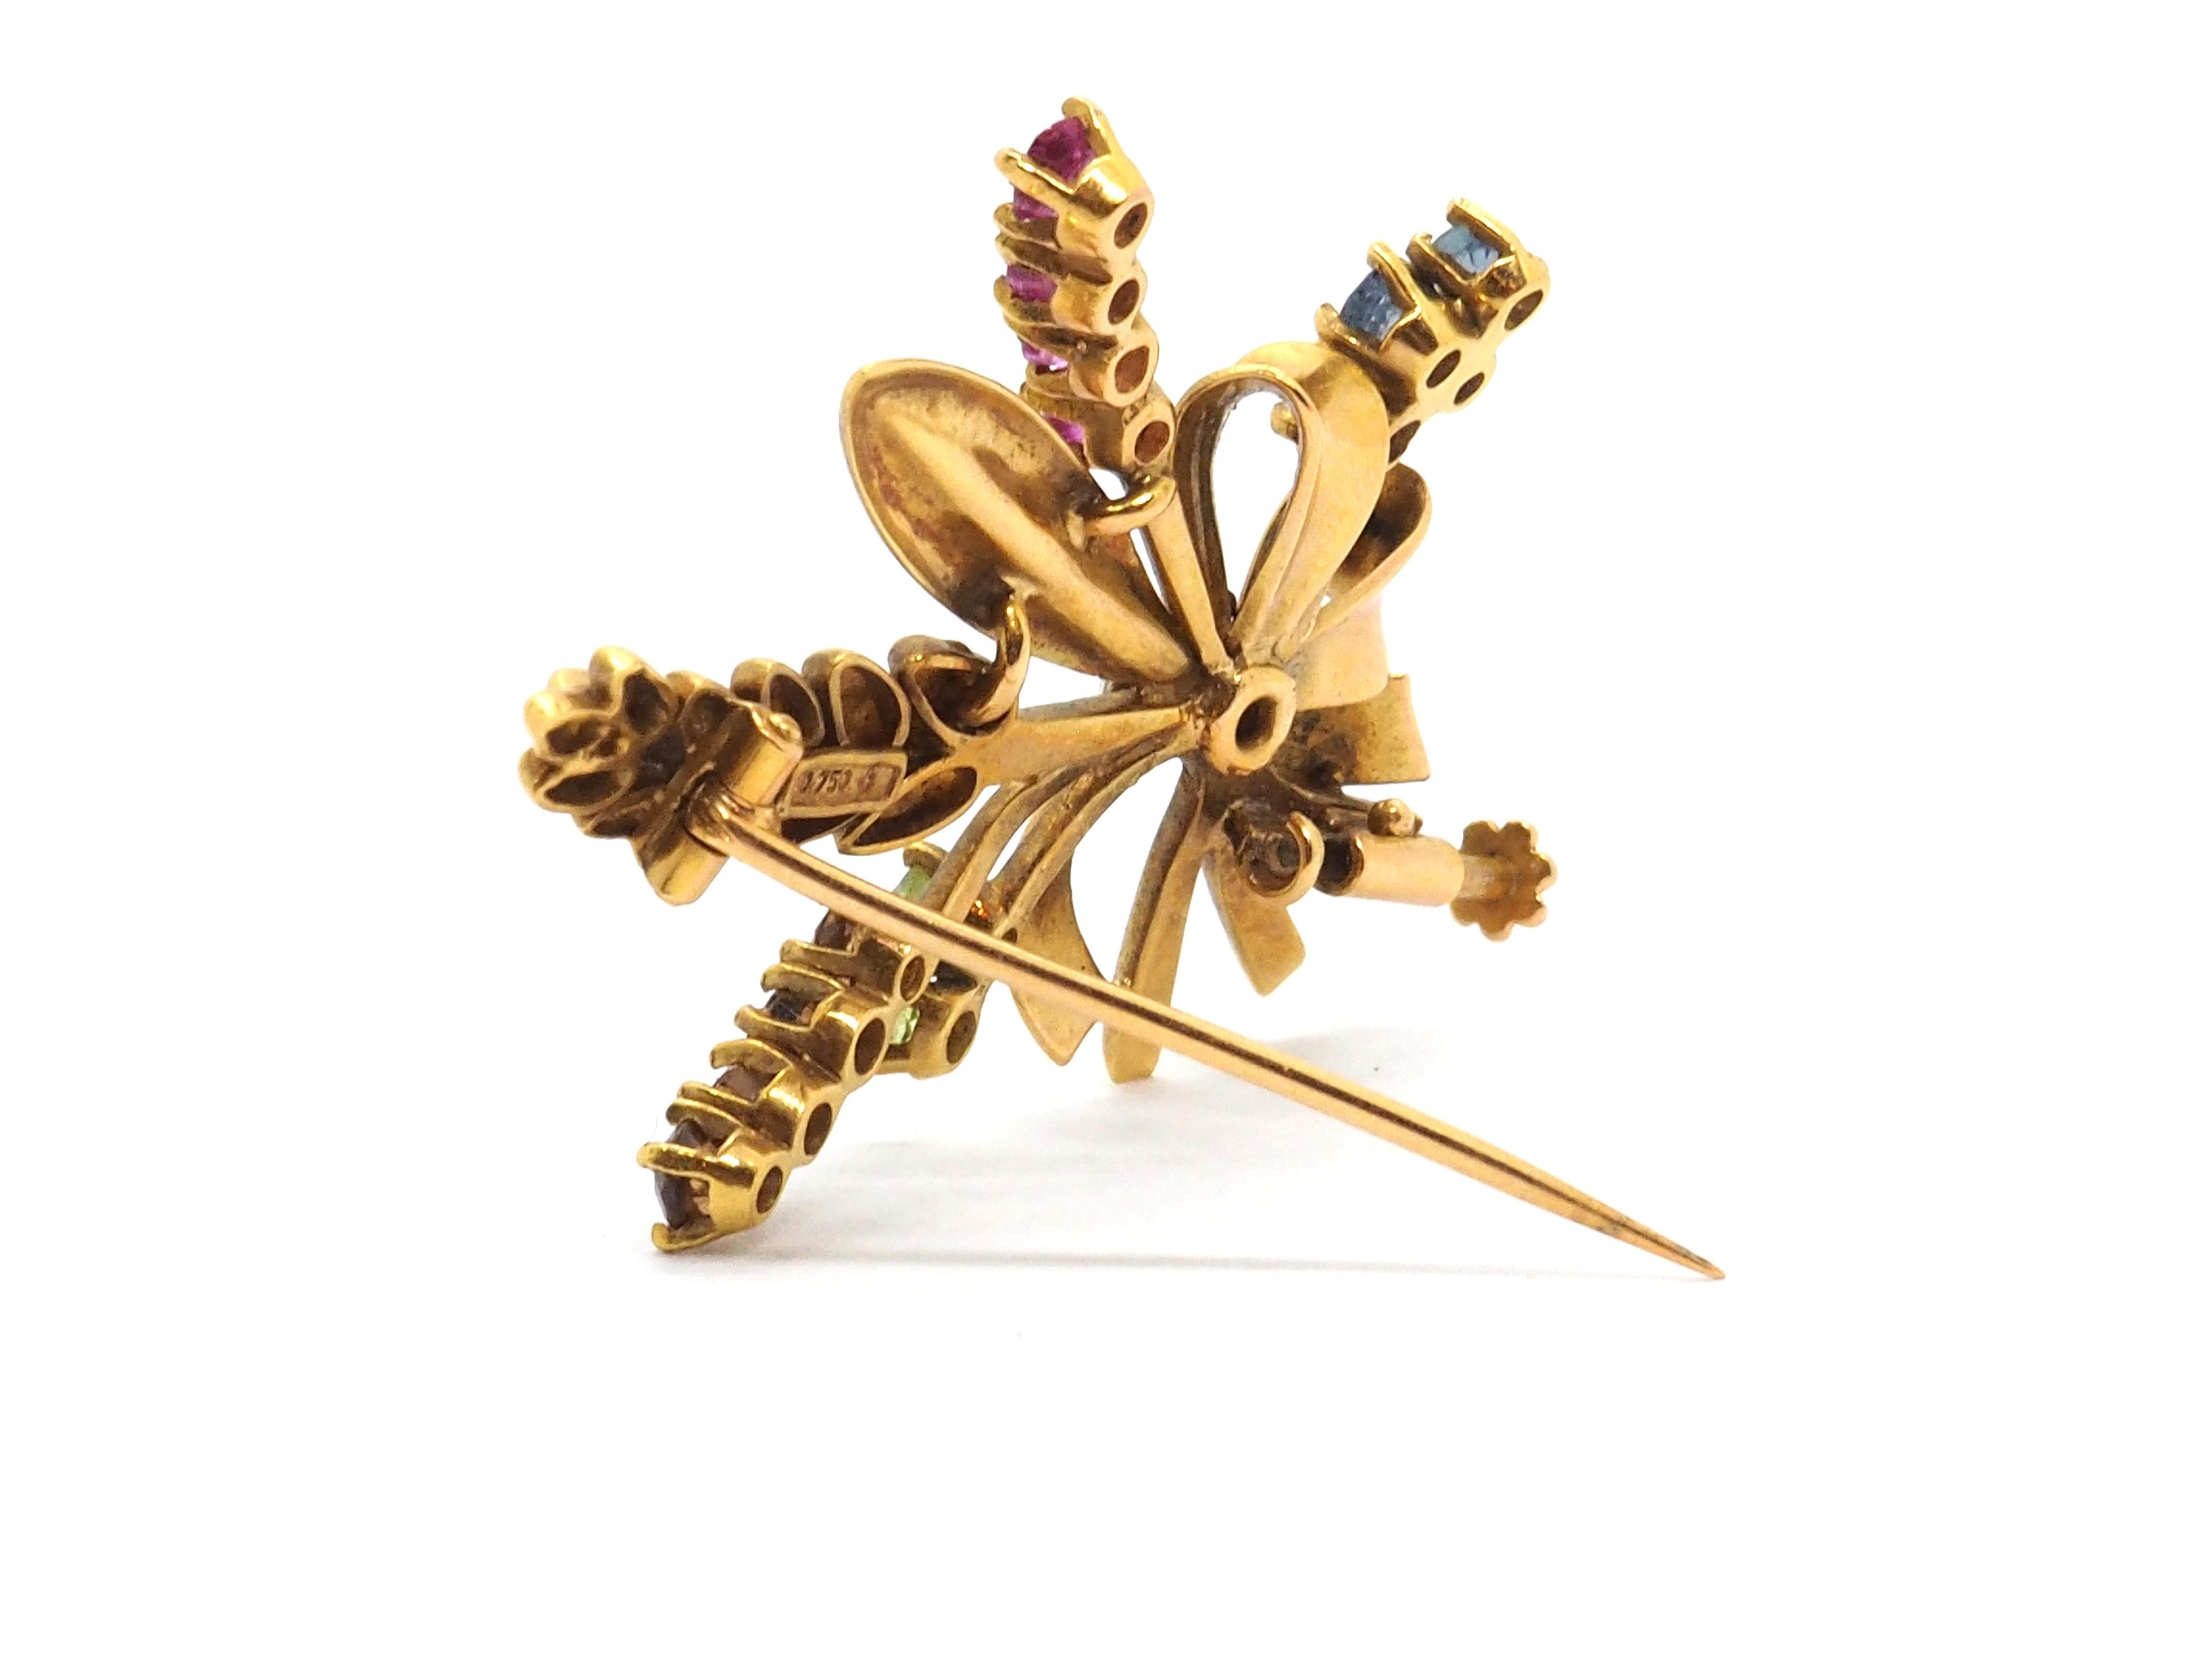 Brooch shaped like a bouquet of flowers and spikes with a tie, crafted in 18 karats yellow gold. The brooch has also the option to be used as pendent.

Each of the flowers is decorated with different gemstones, one with 4 blue topaz, another one has